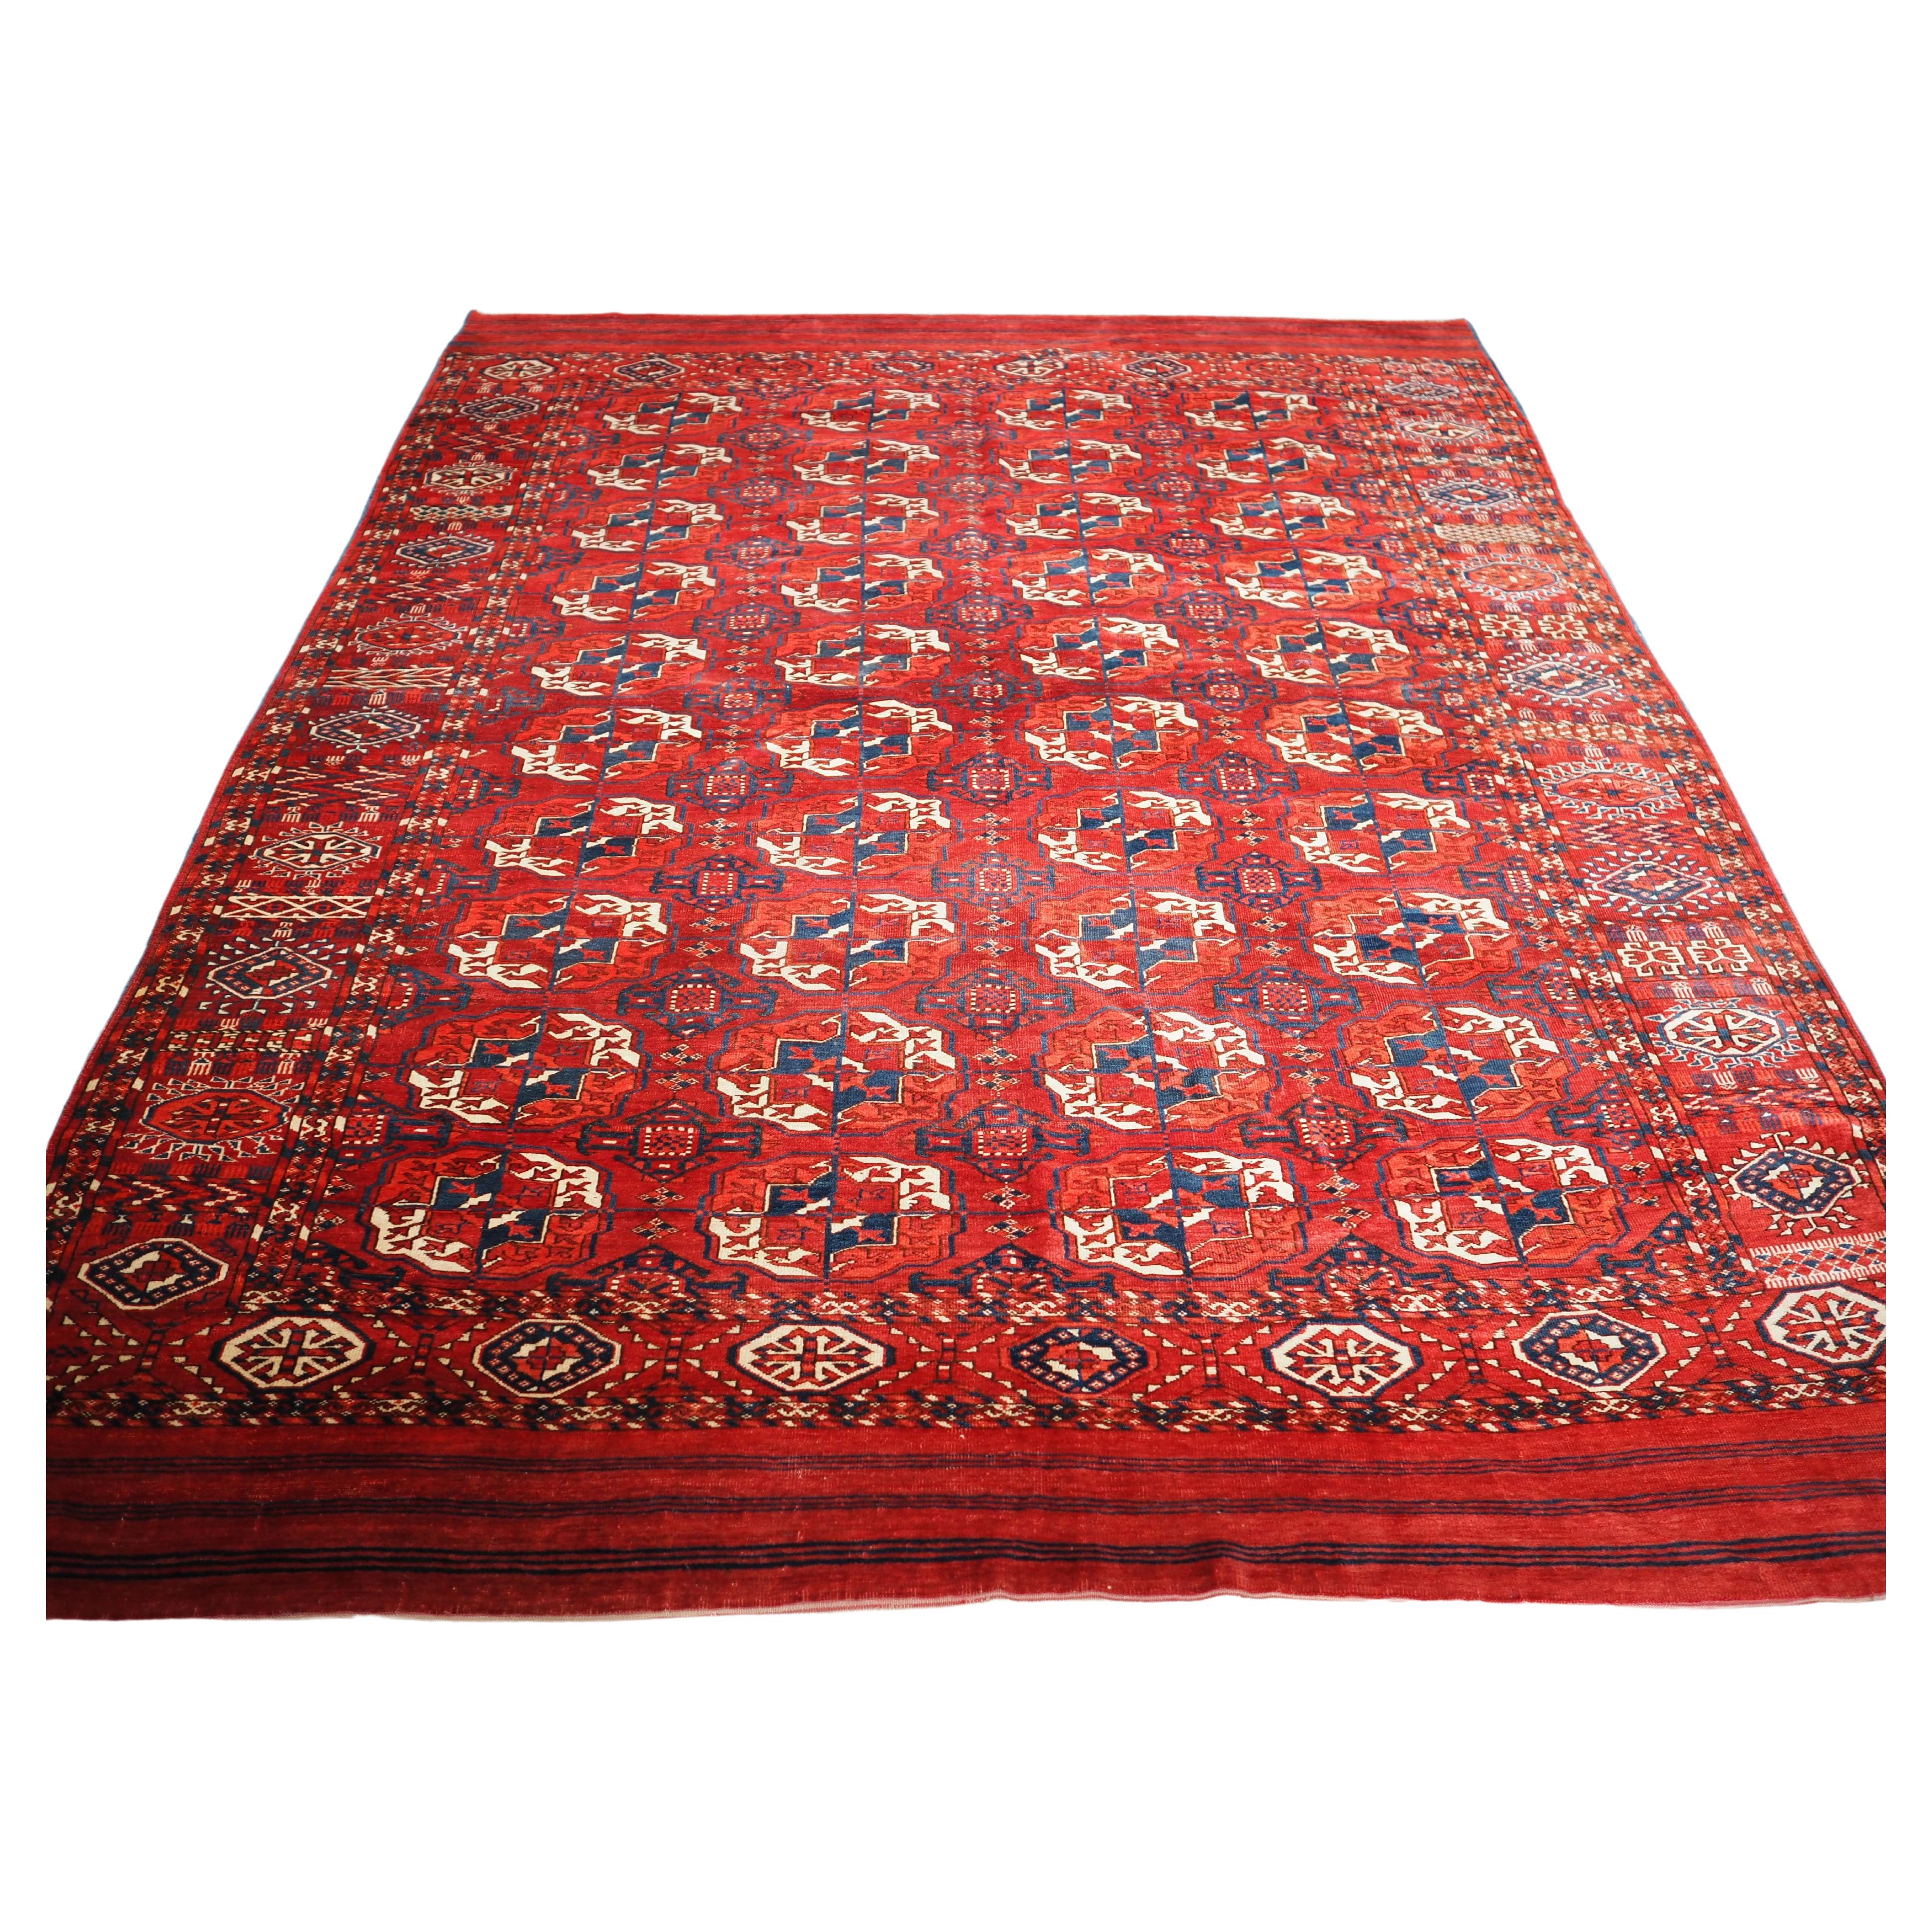 Antique Tekke Turkmen Main Carpet with 4 Rows of 10 Guls For Sale